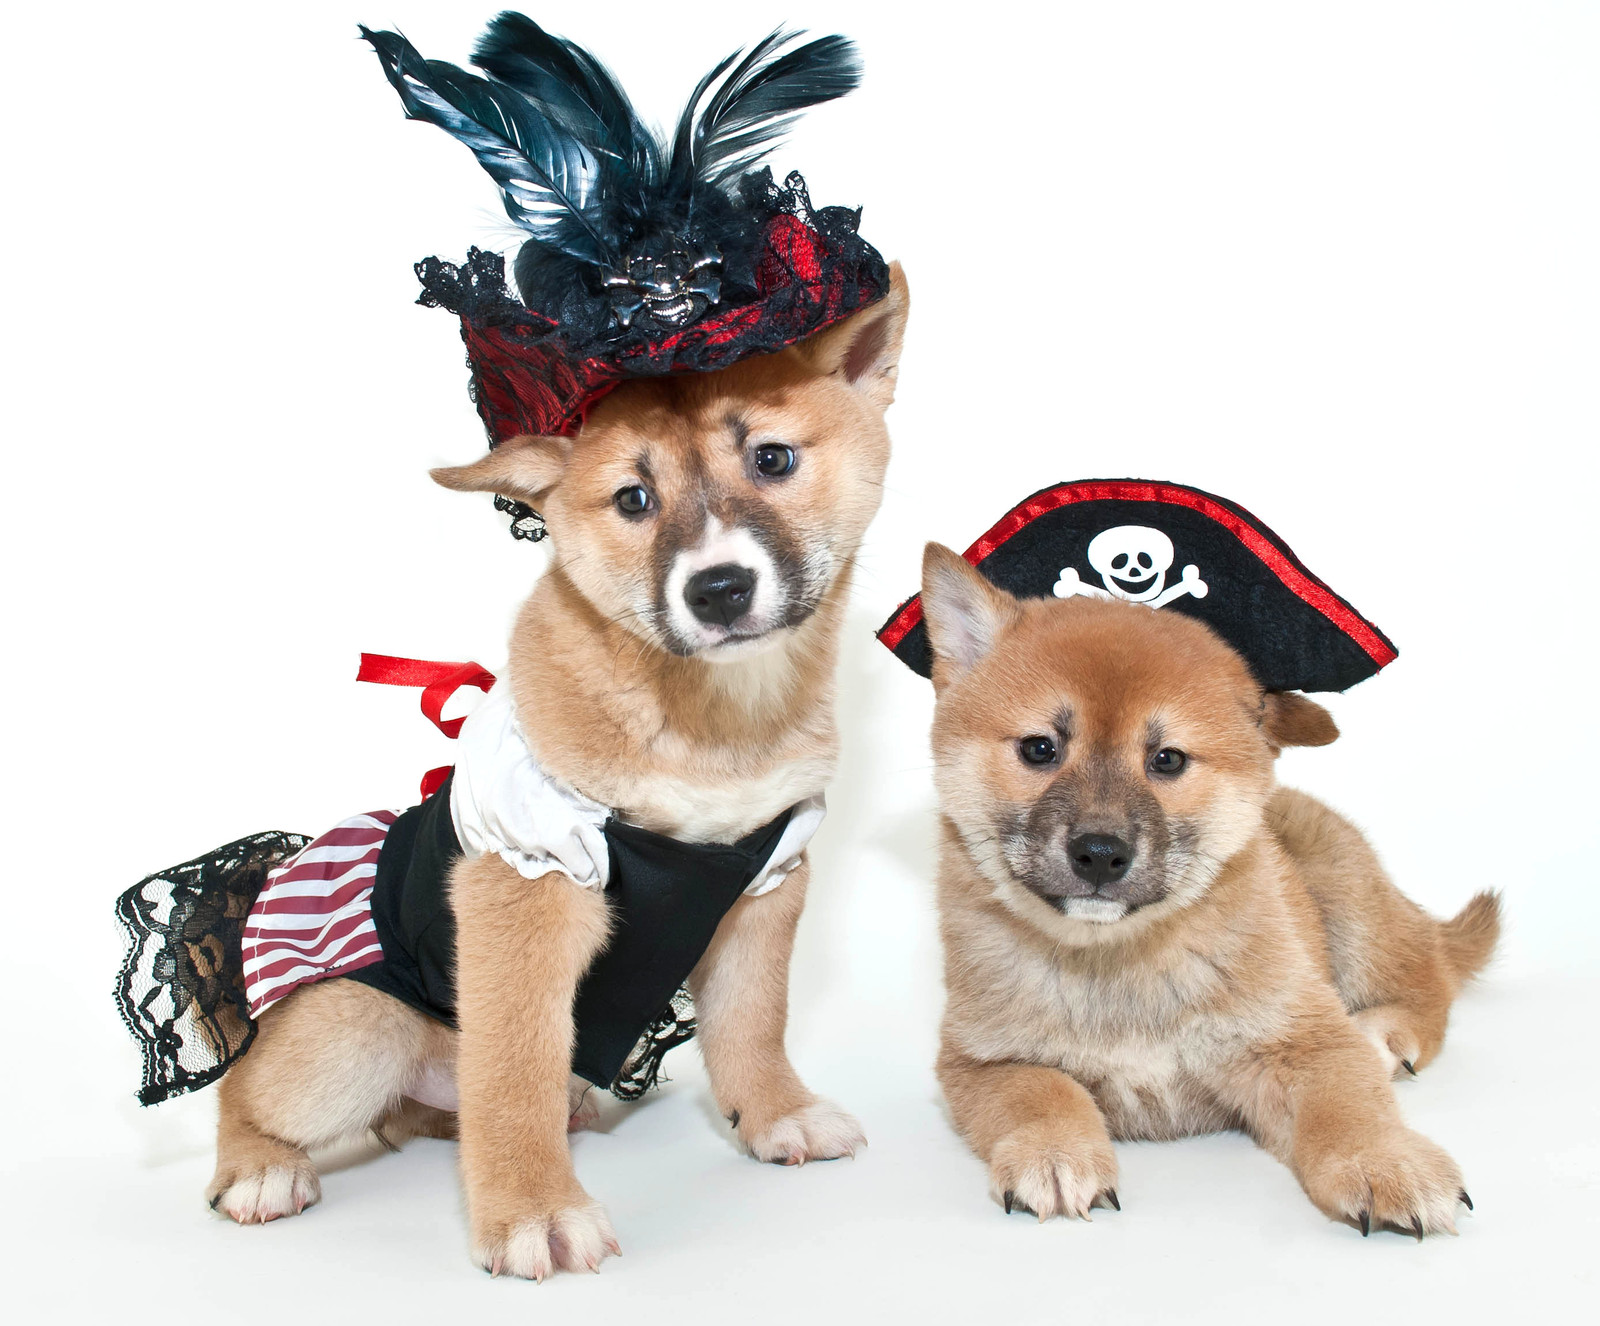 Two Shiba Inu (a breed of dog) puppies. They are small with golden-colored fur. They are both wearing hats; one is wearing a pirate hat and the other is wearing a feather hat.